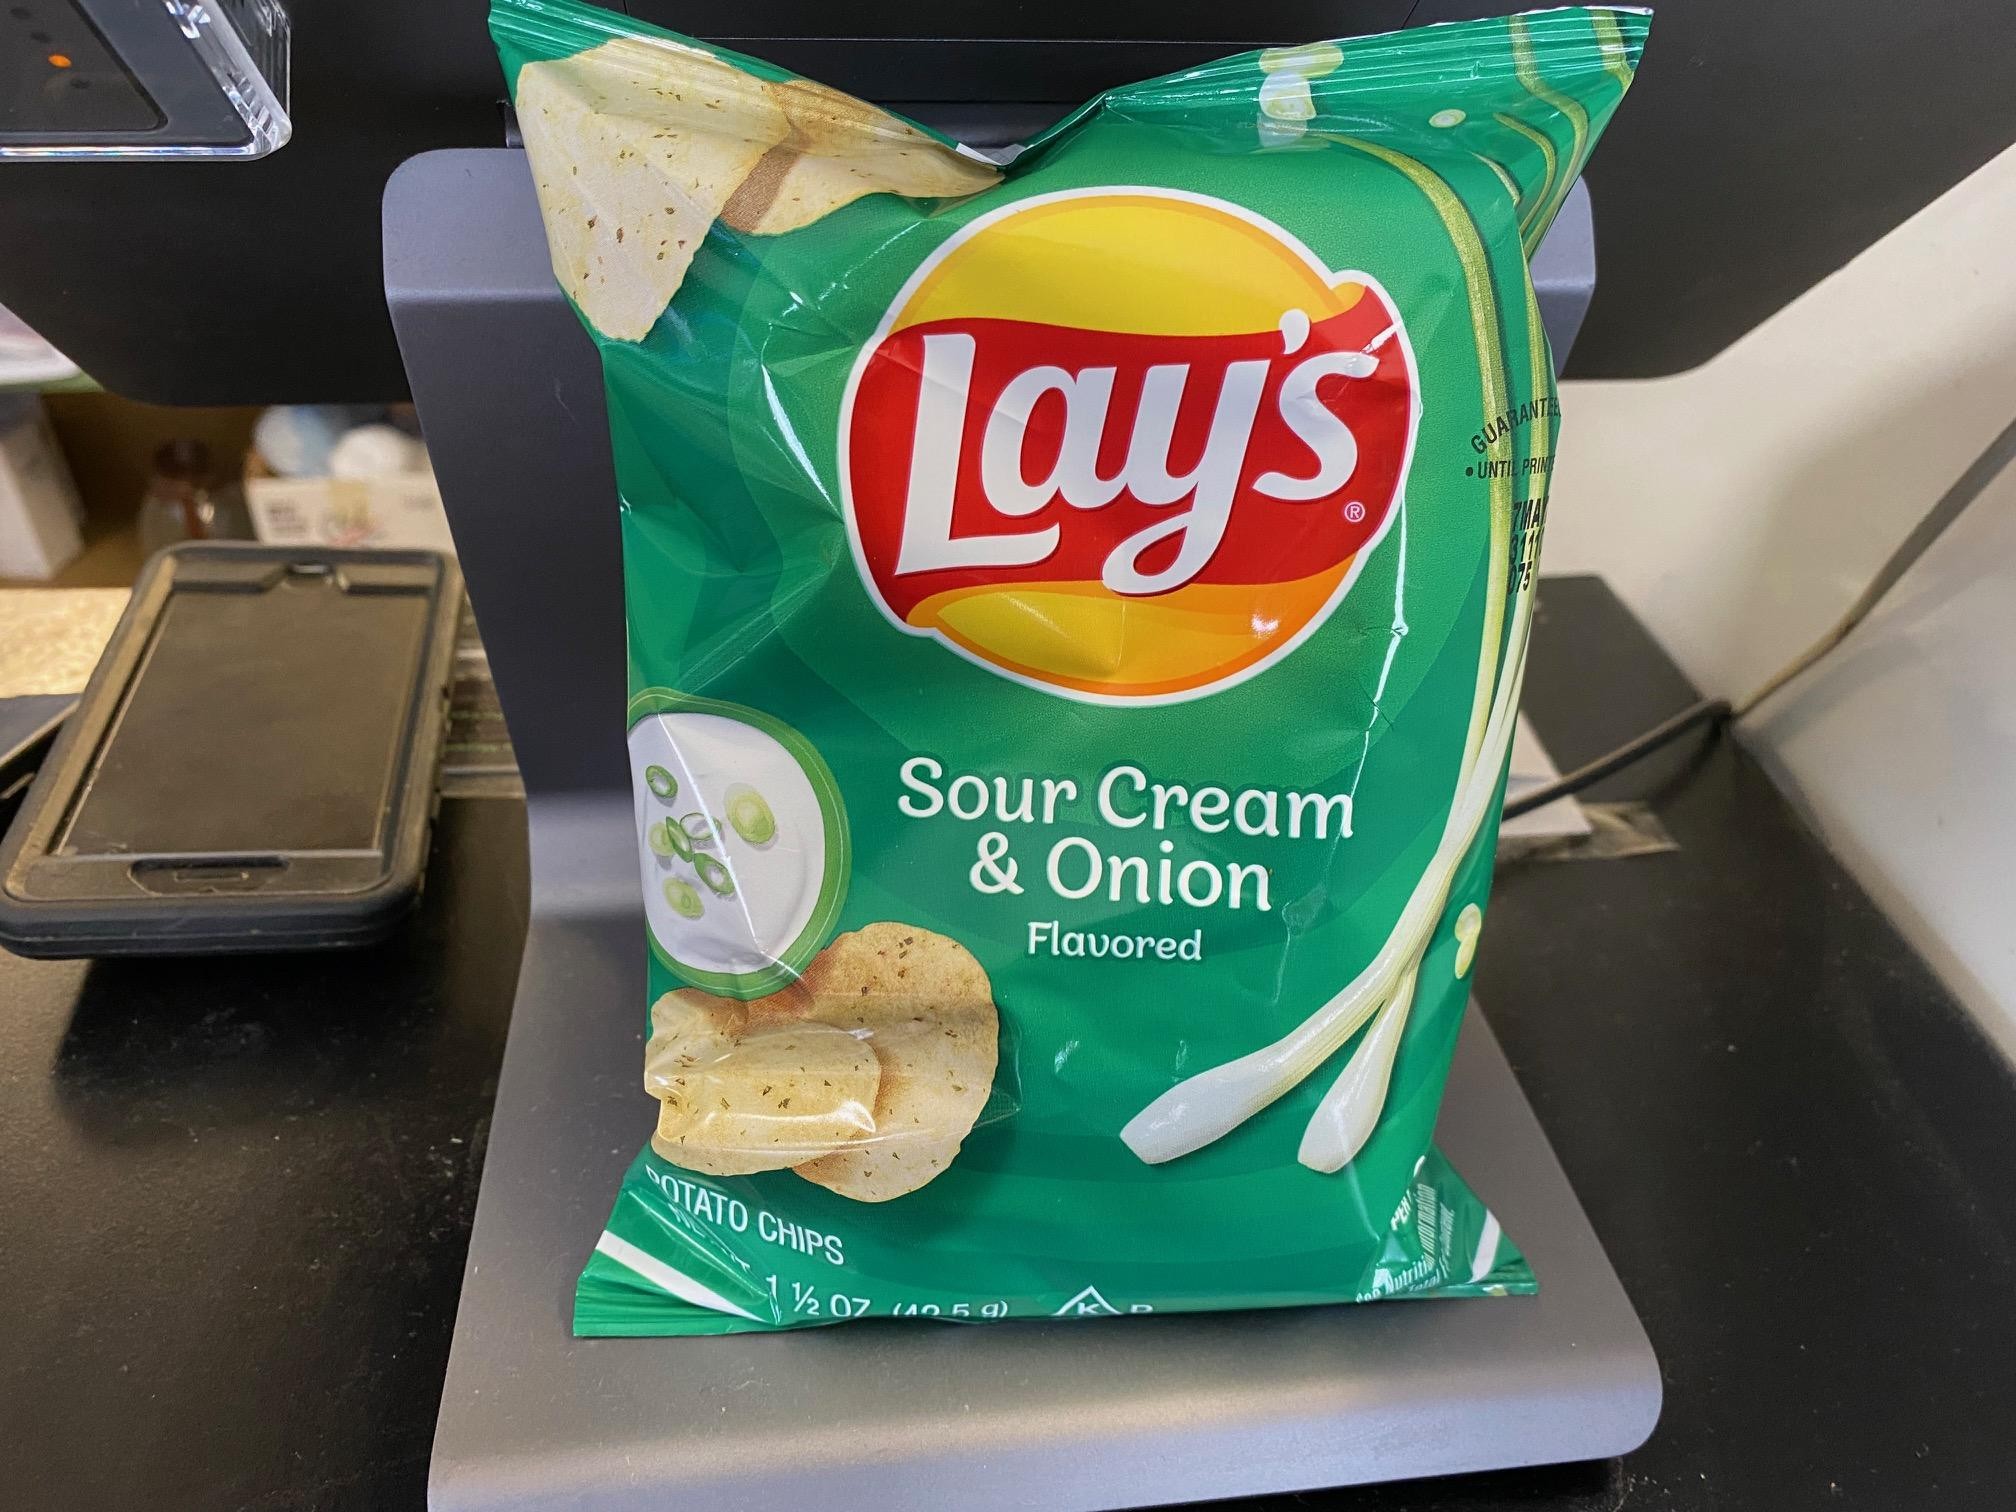 Lays Sour Cream and Onion